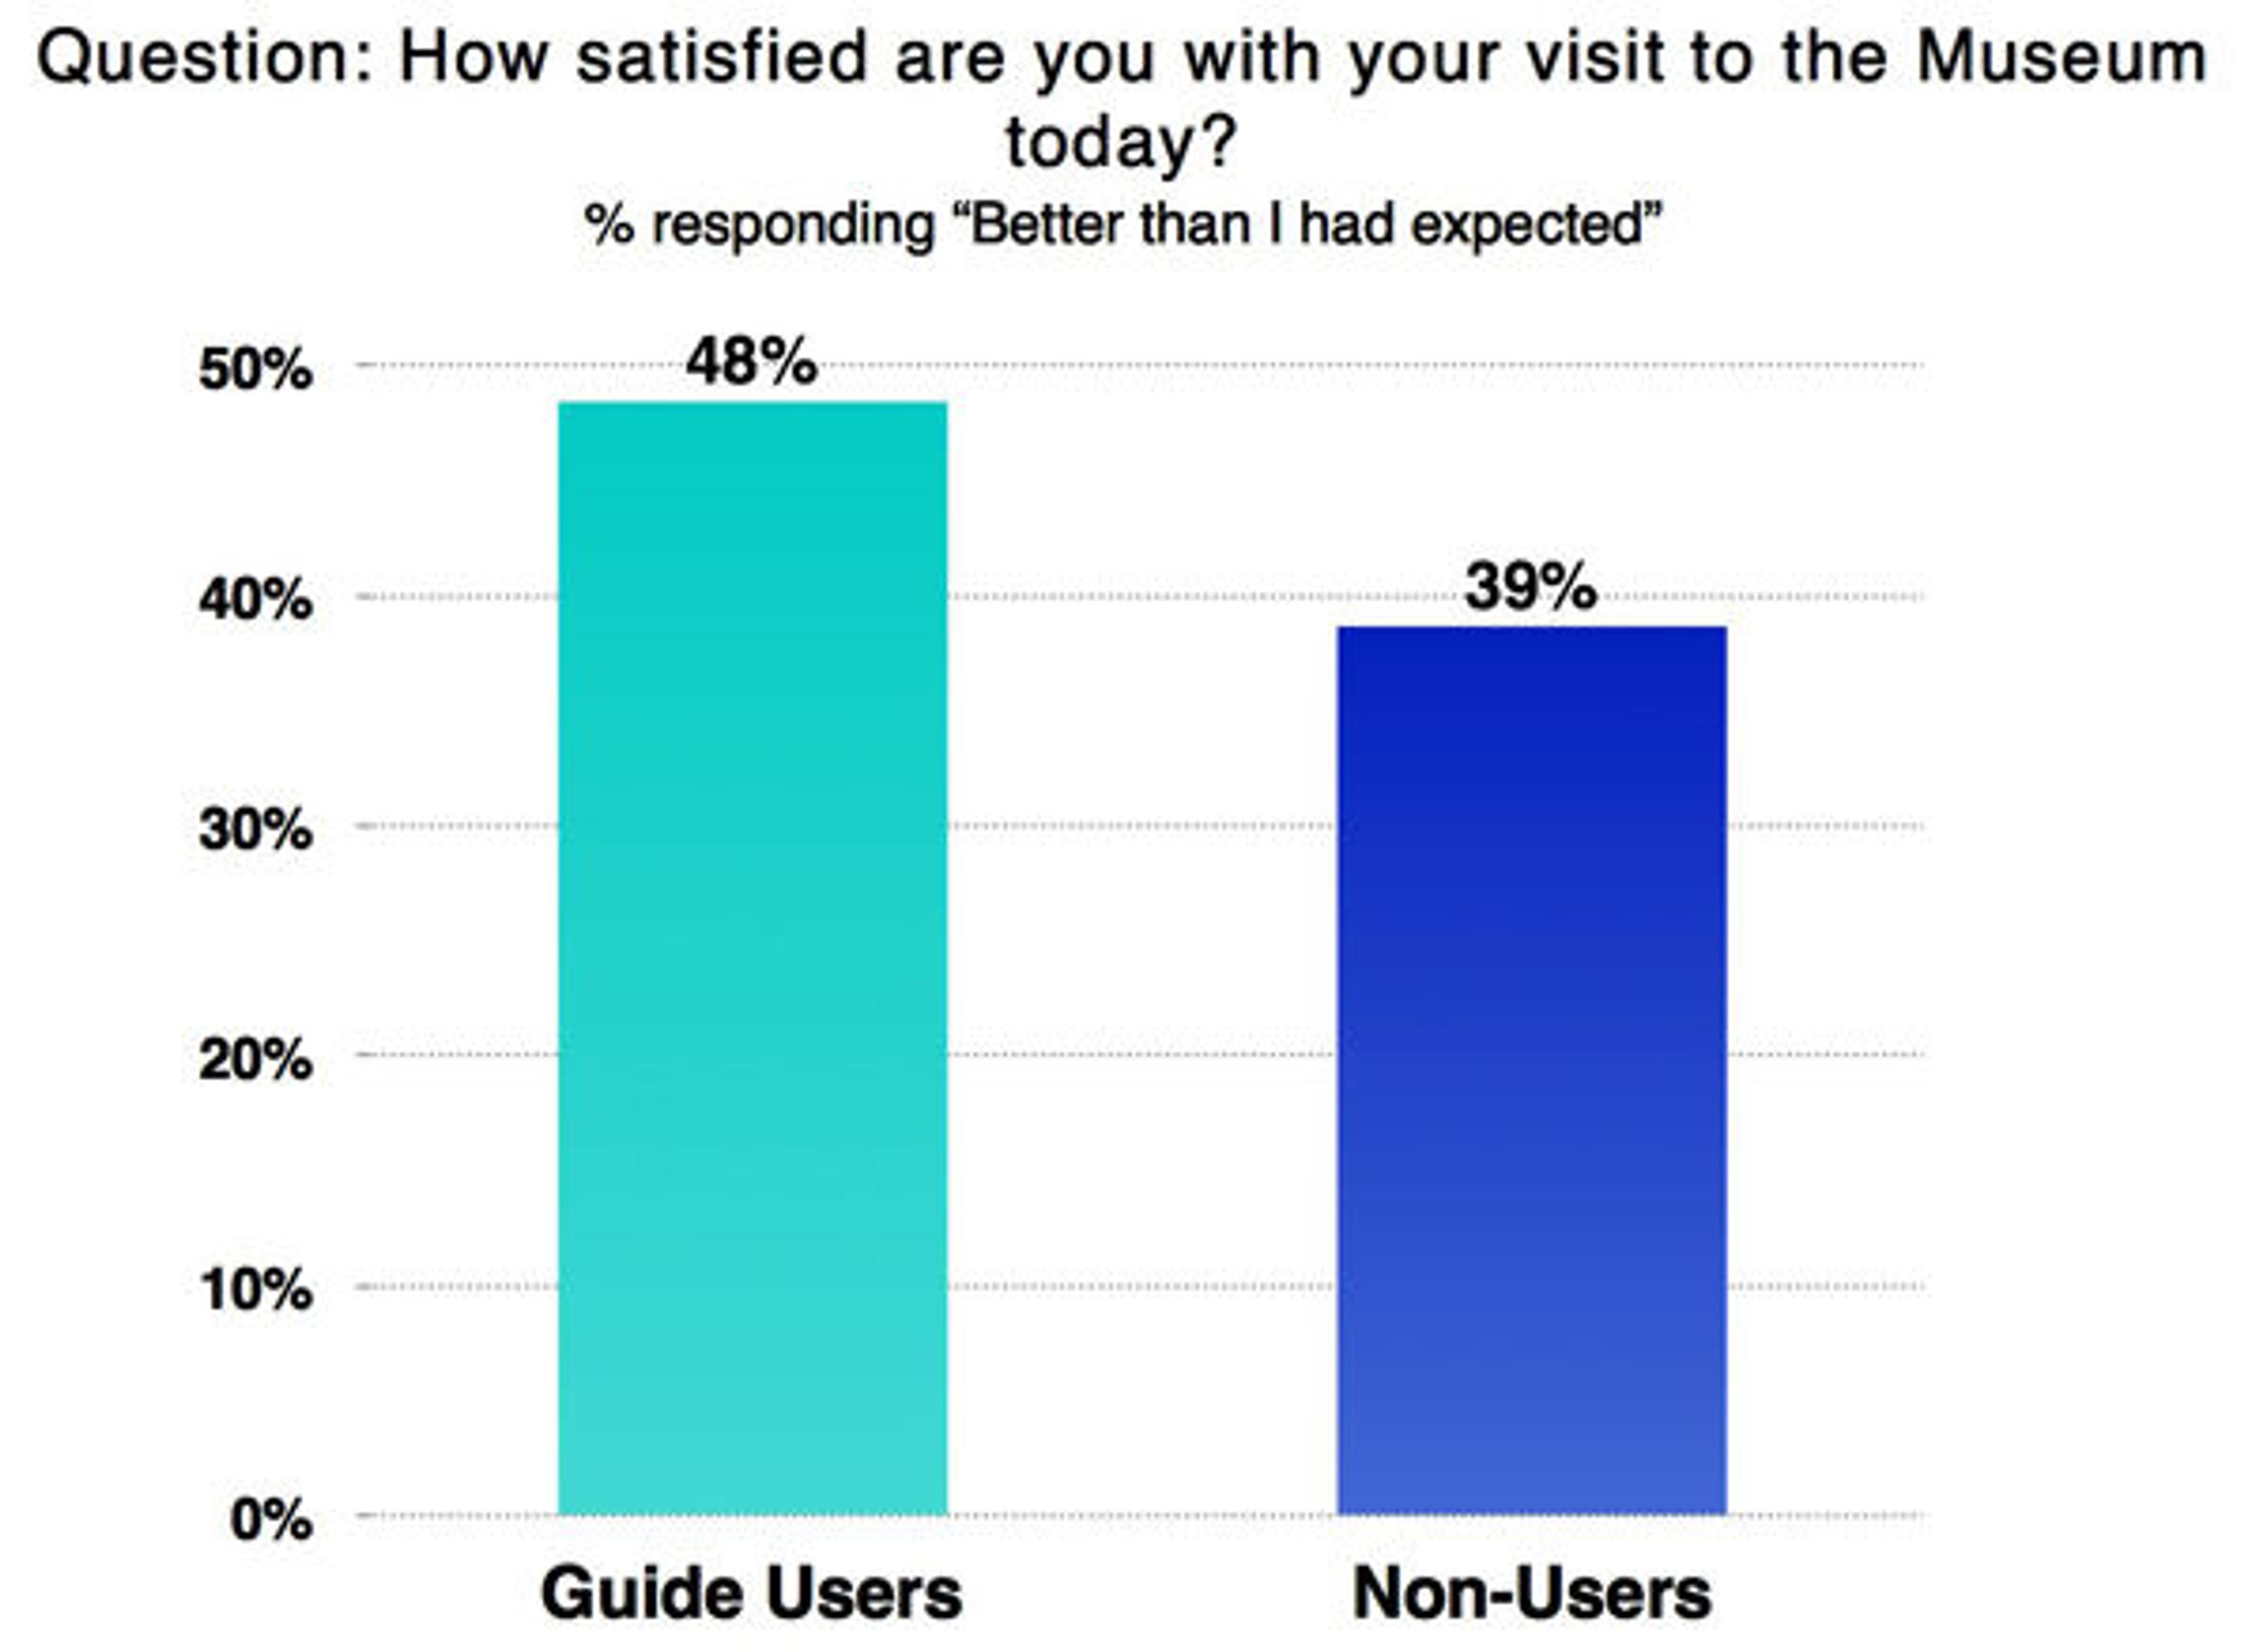 The percentage of visitors who had an experience that was better than expected